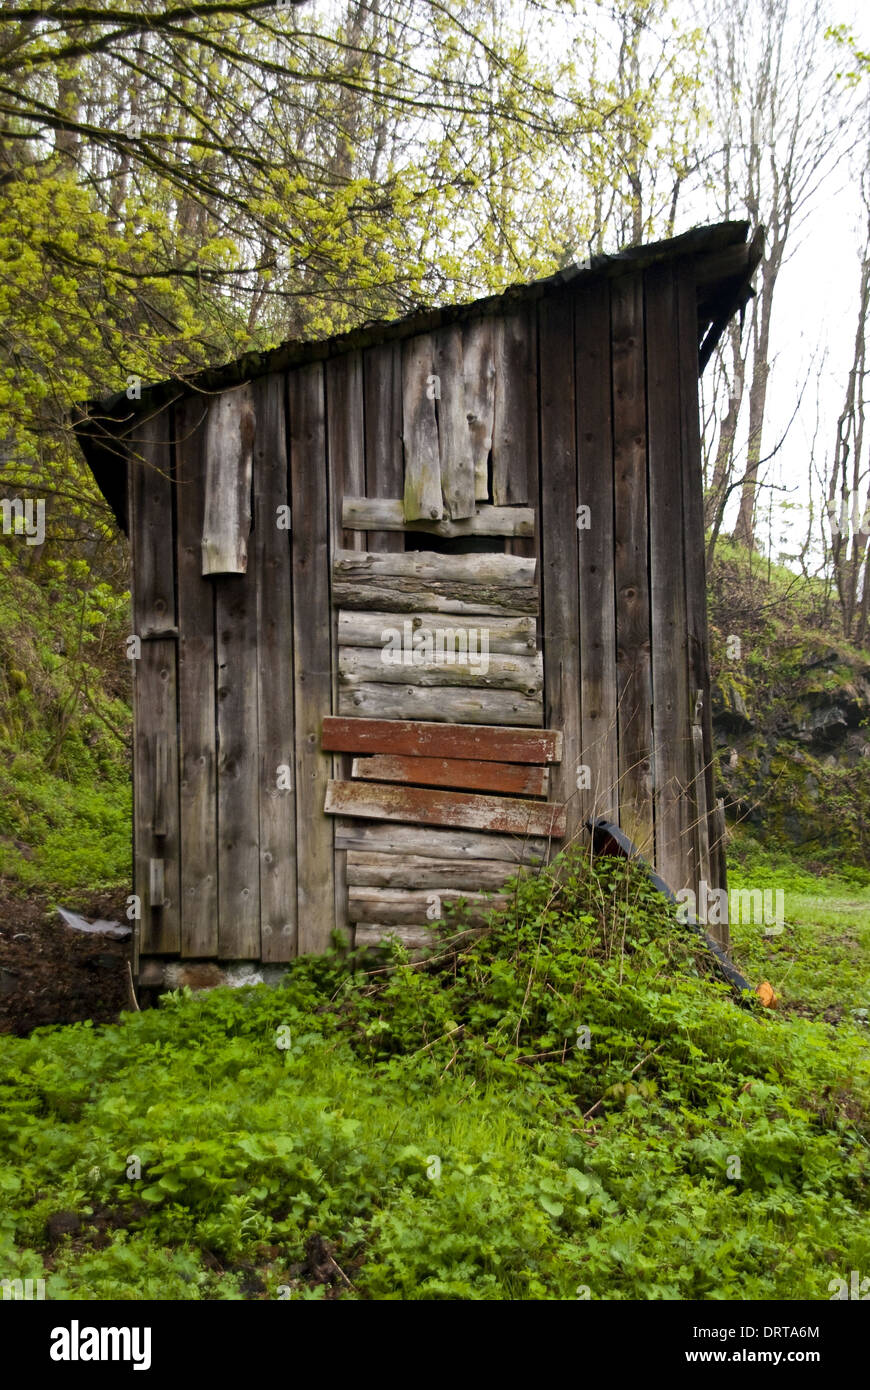 Shed in Harz Mountains, Germany Stock Photo